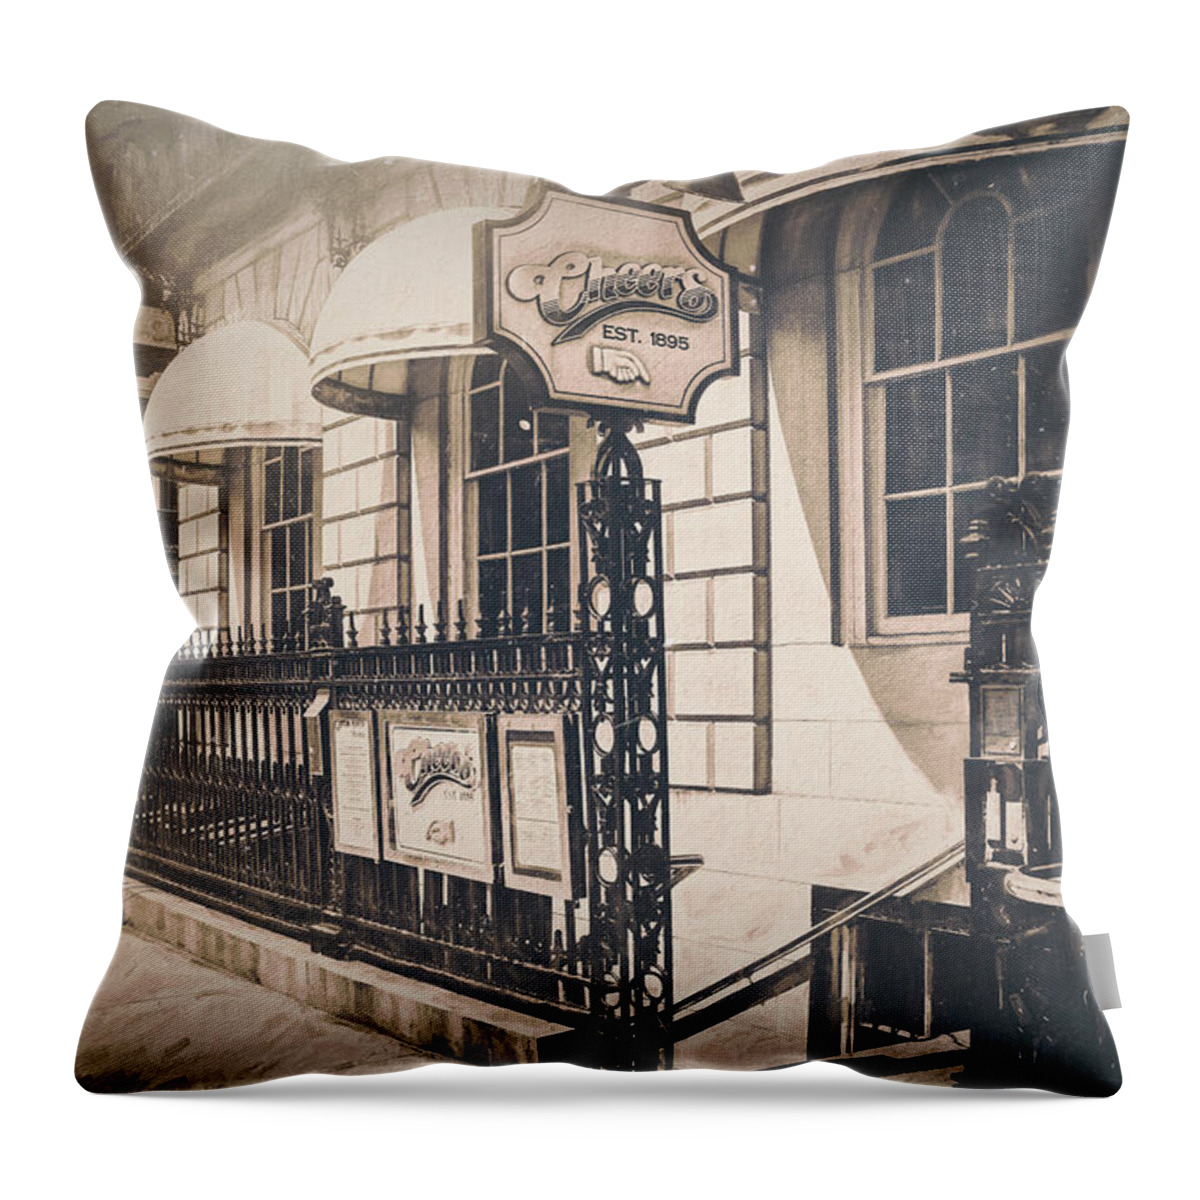 Boston Throw Pillow featuring the photograph Cheers Bar Beacon Hill Boston Vintage by Carol Japp